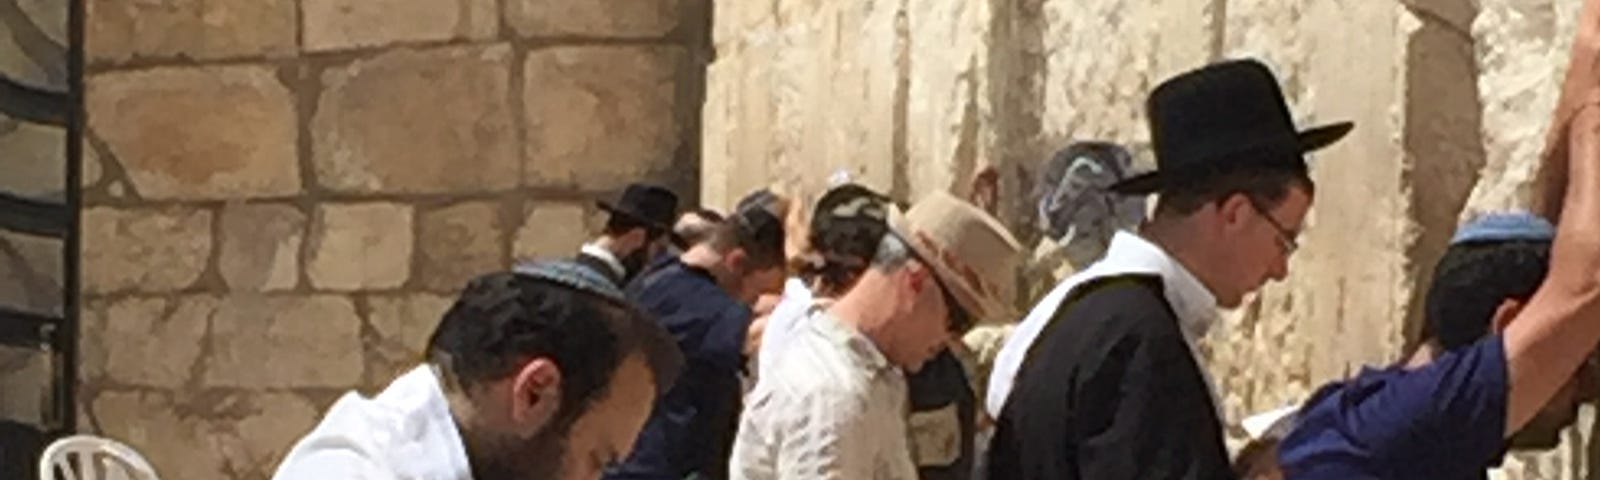 People praying at the Western Wall in Jerusalem.